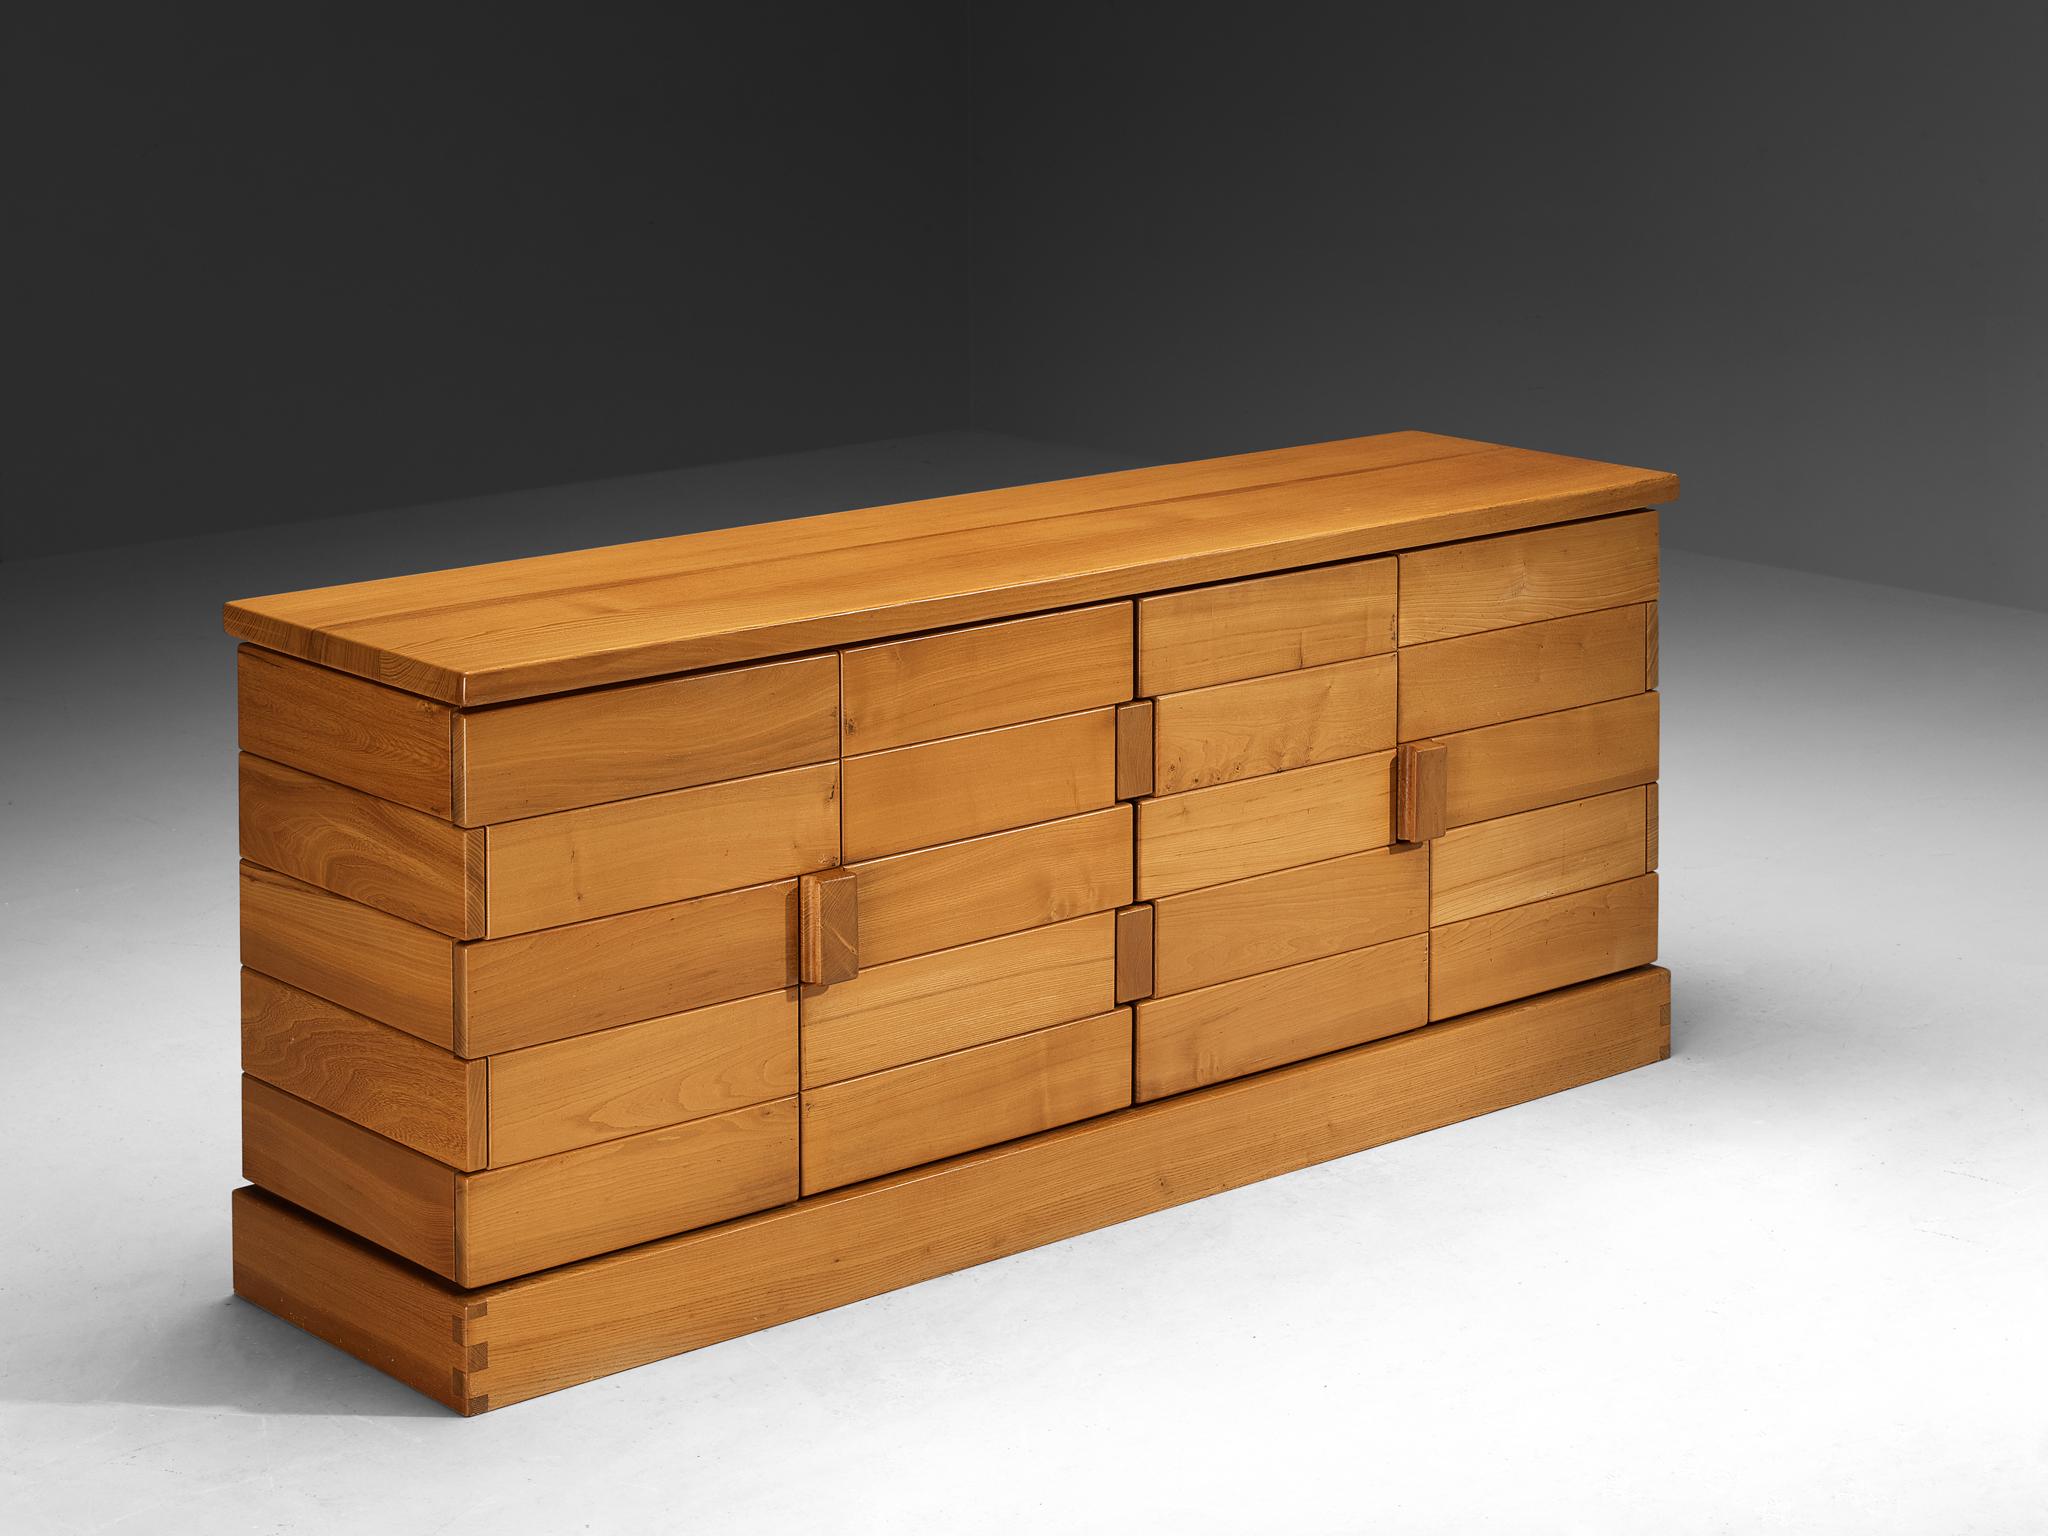 Maison Regain, sideboard, solid elm, France, 1970s

Stunning French cabinet executed in solid elm, designed by Maison Regain. The sideboard is sturdy and combines a simplified yet complex design with nifty, solid construction details that